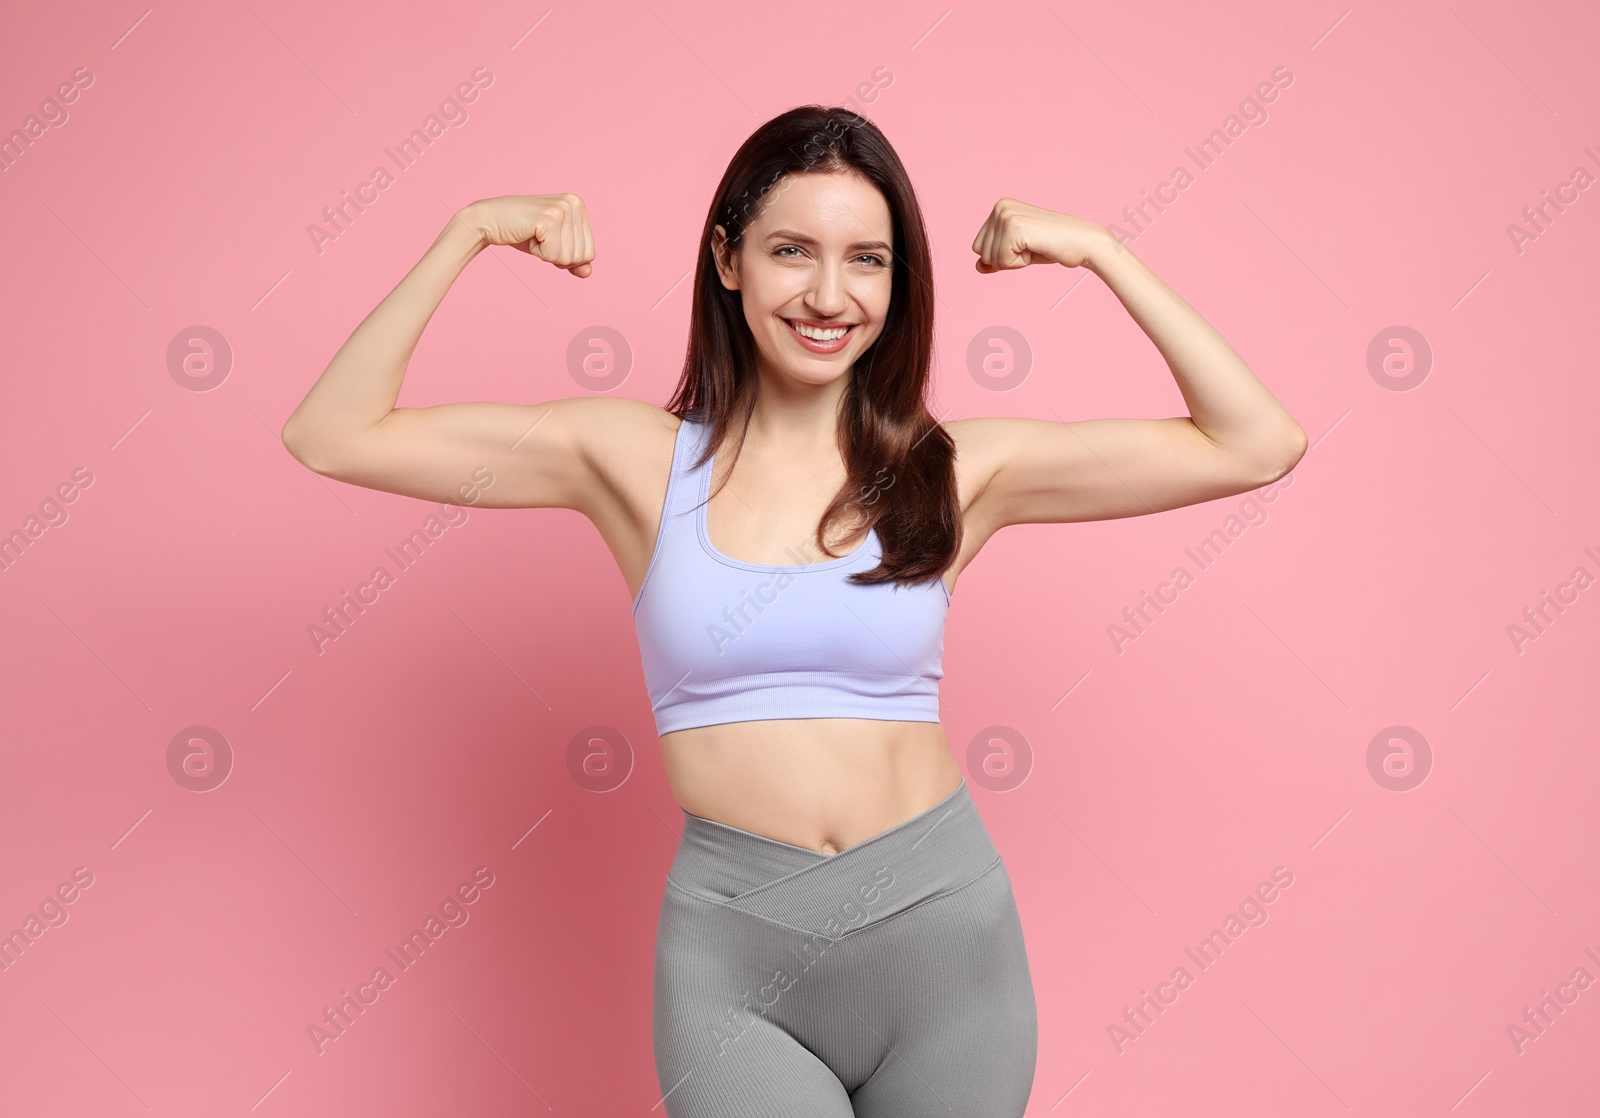 Photo of Happy young woman with slim body showing her muscles on pink background